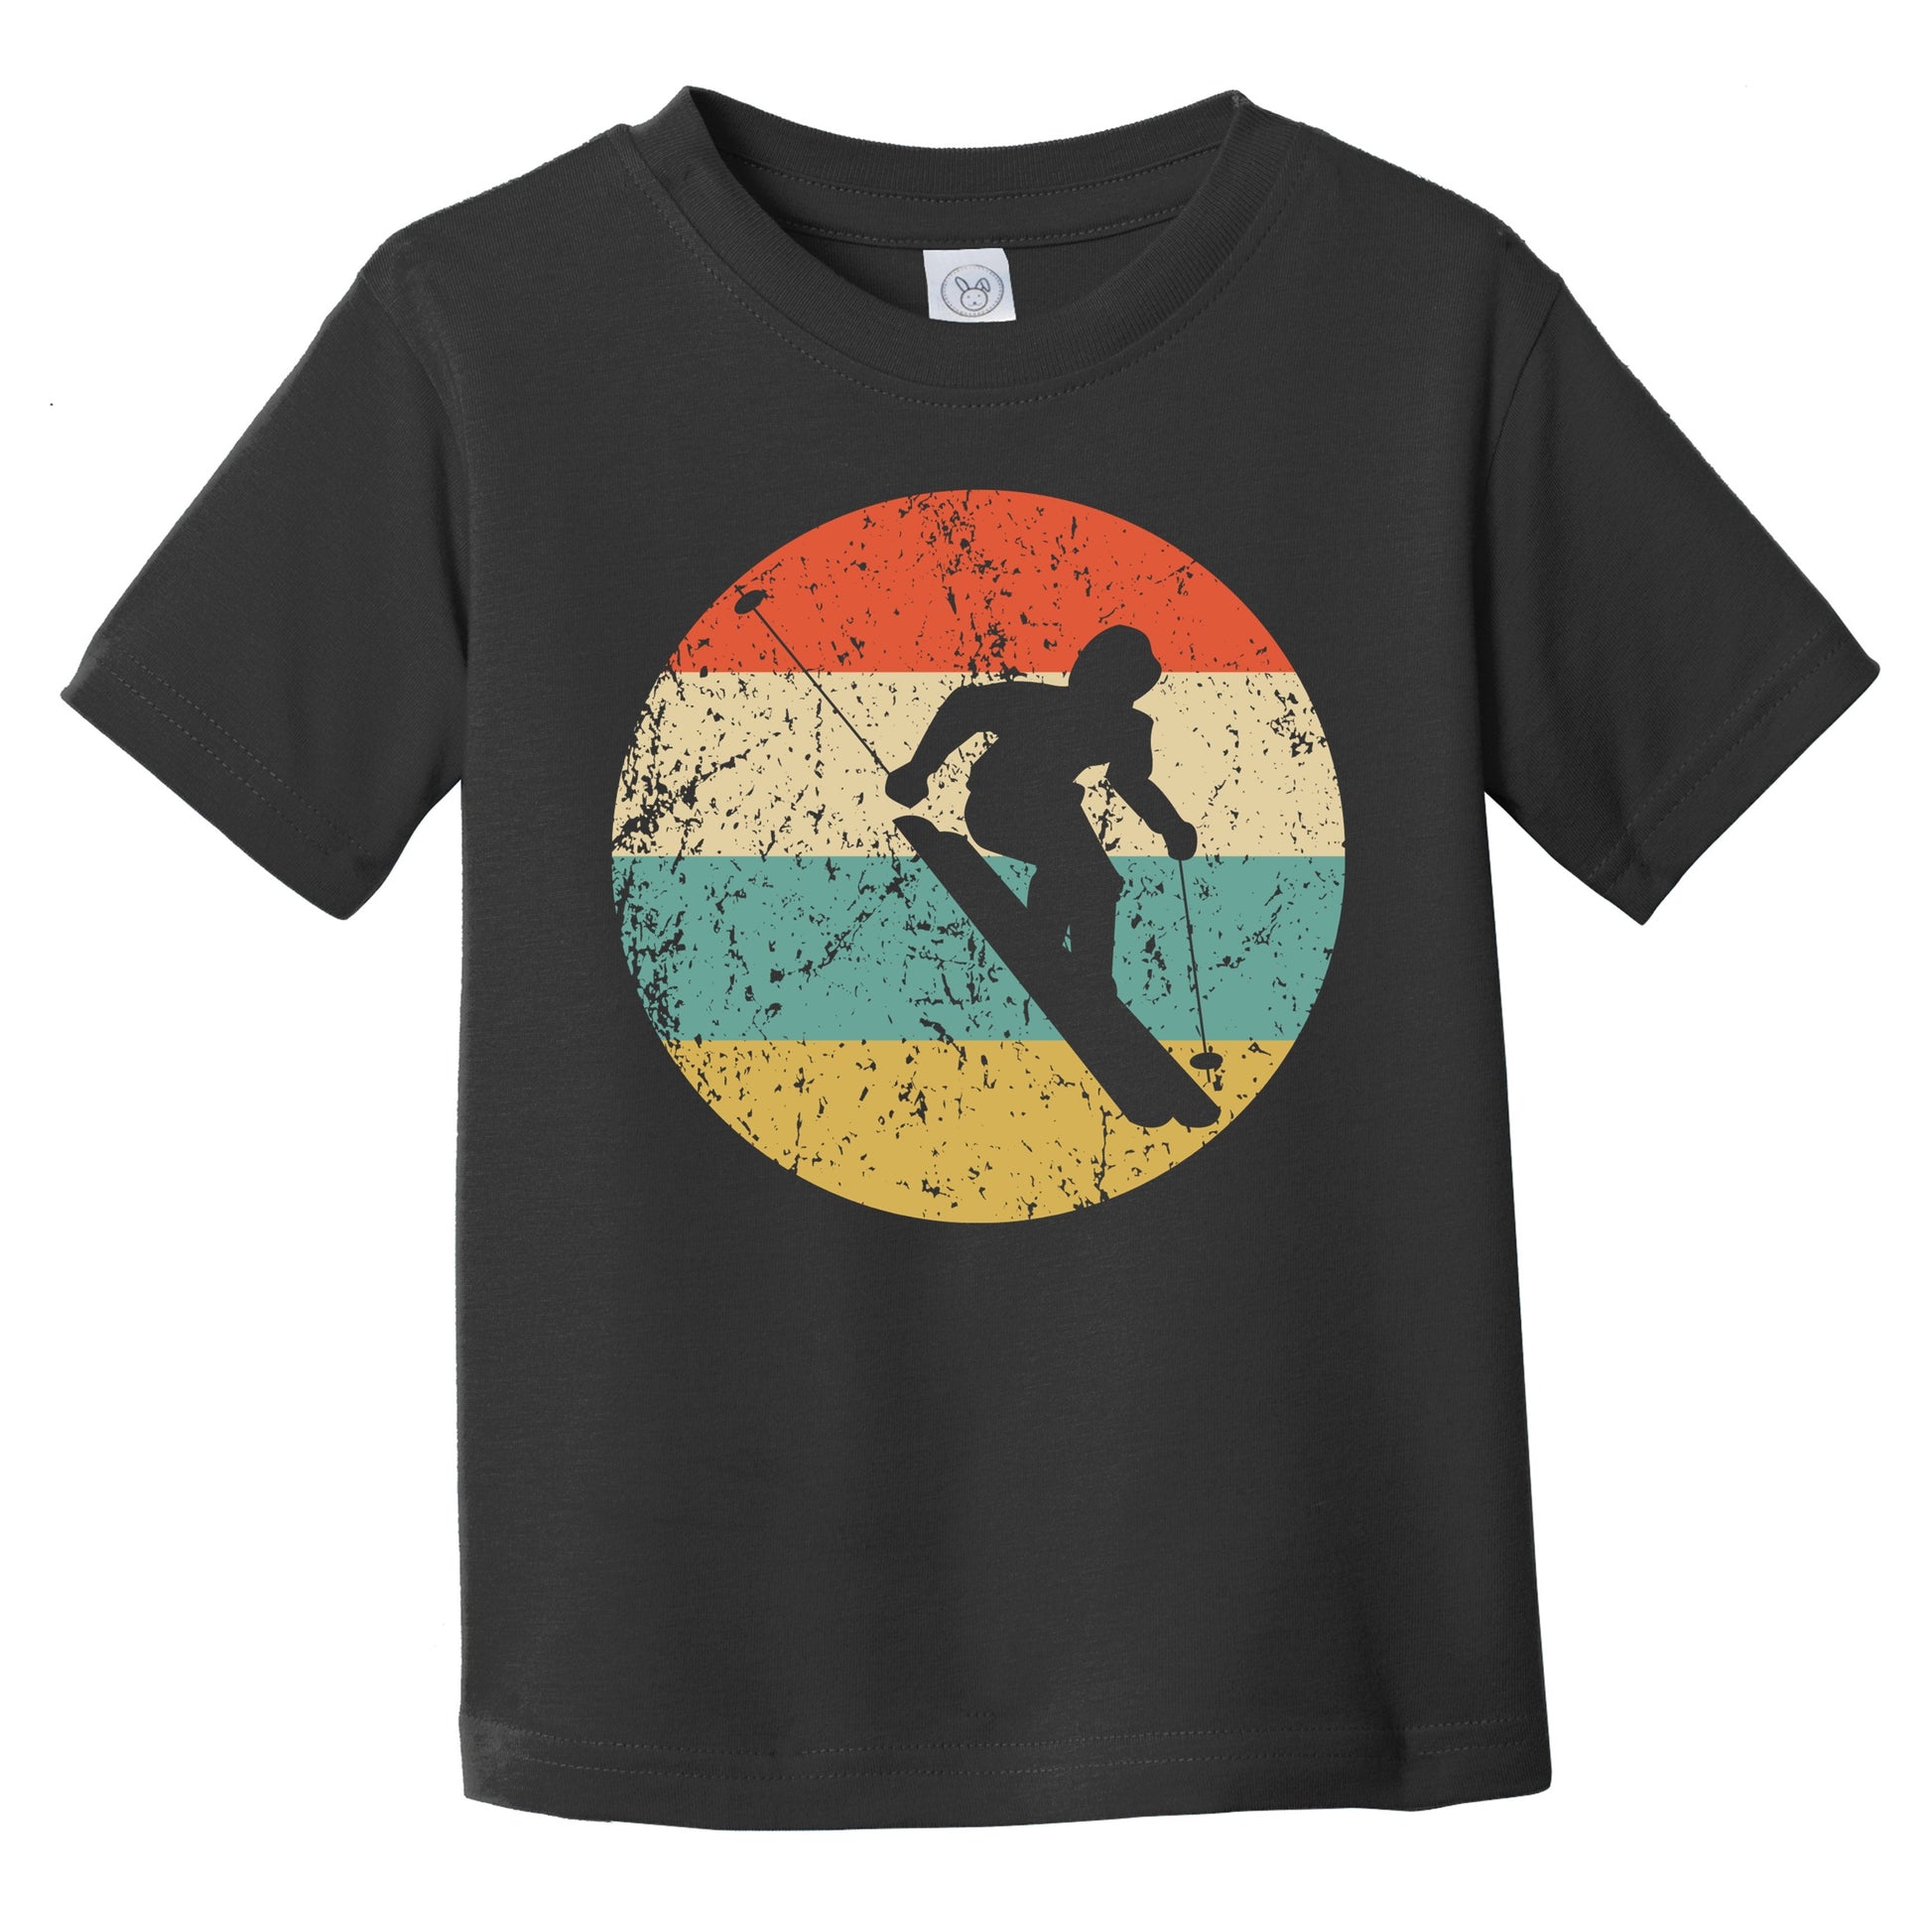 Downhill Skier Skiing Silhouette Retro Winter Sports Infant Toddler T-Shirt